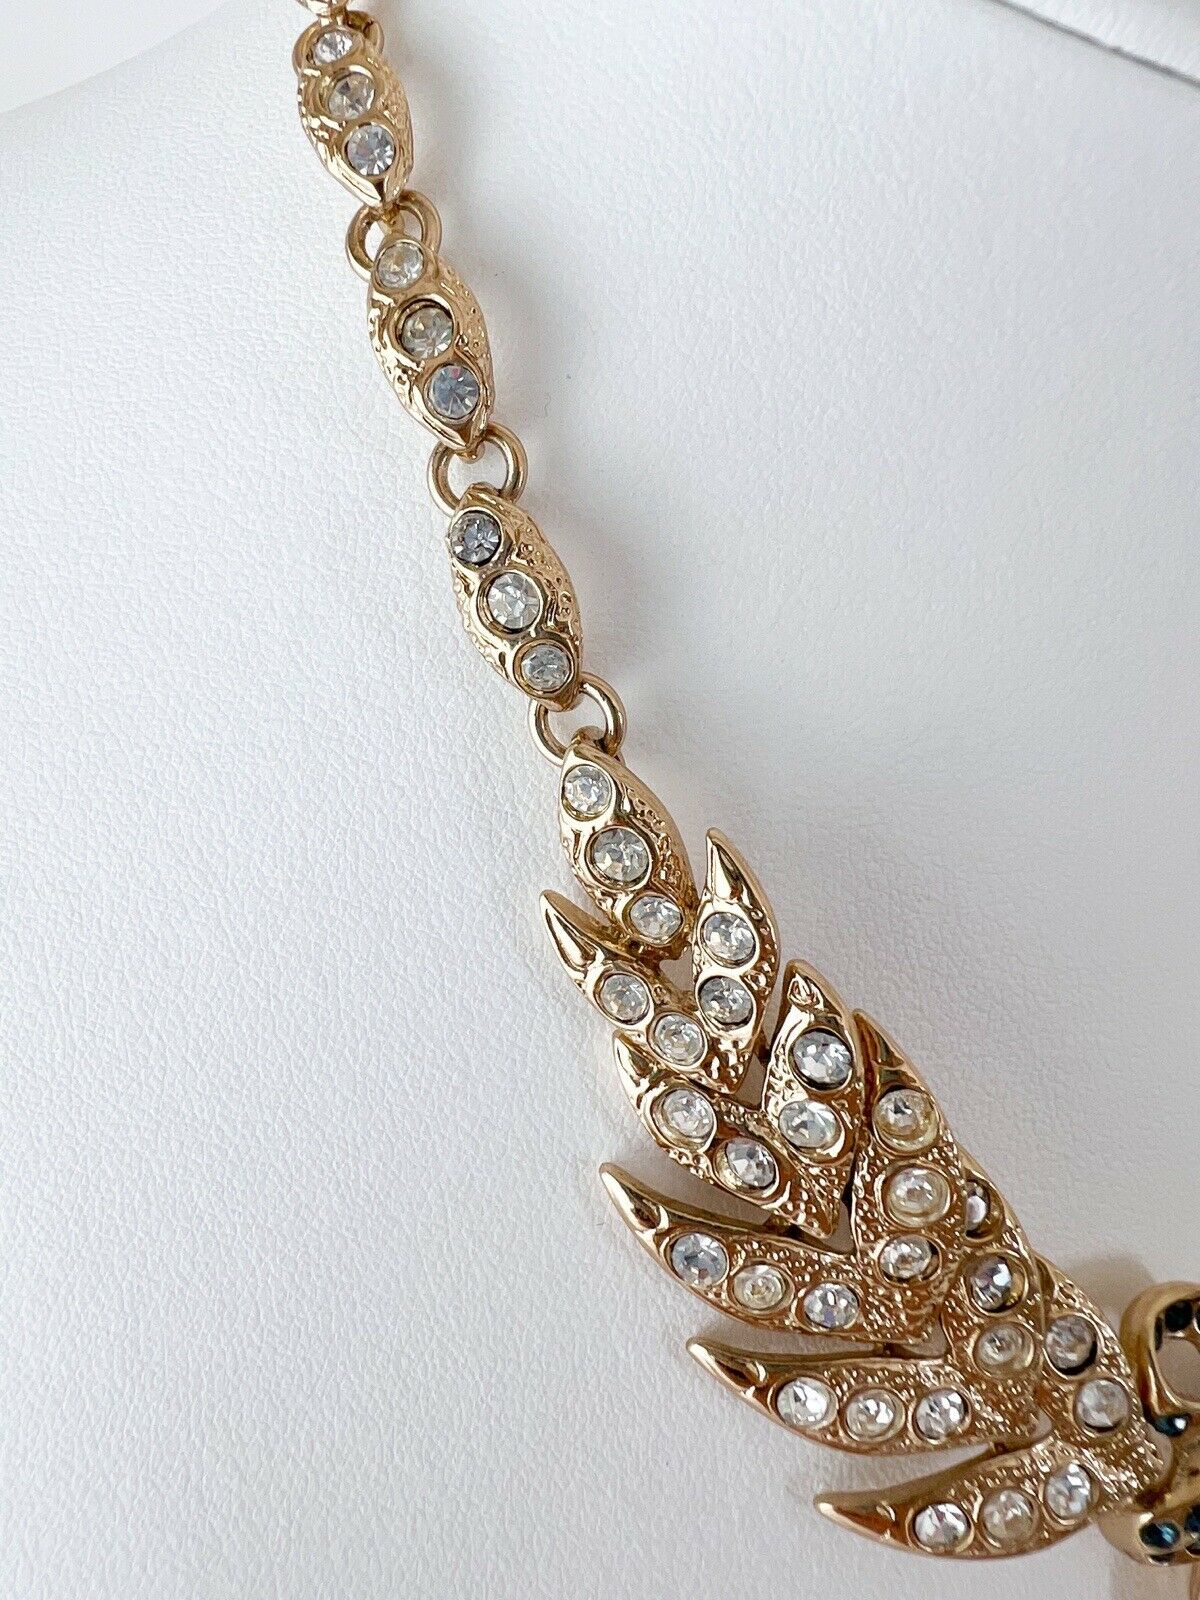 YSL Yves Saint Laurent Gold Tone Bow Leaf Rhinestone Necklace Vintage Made in France